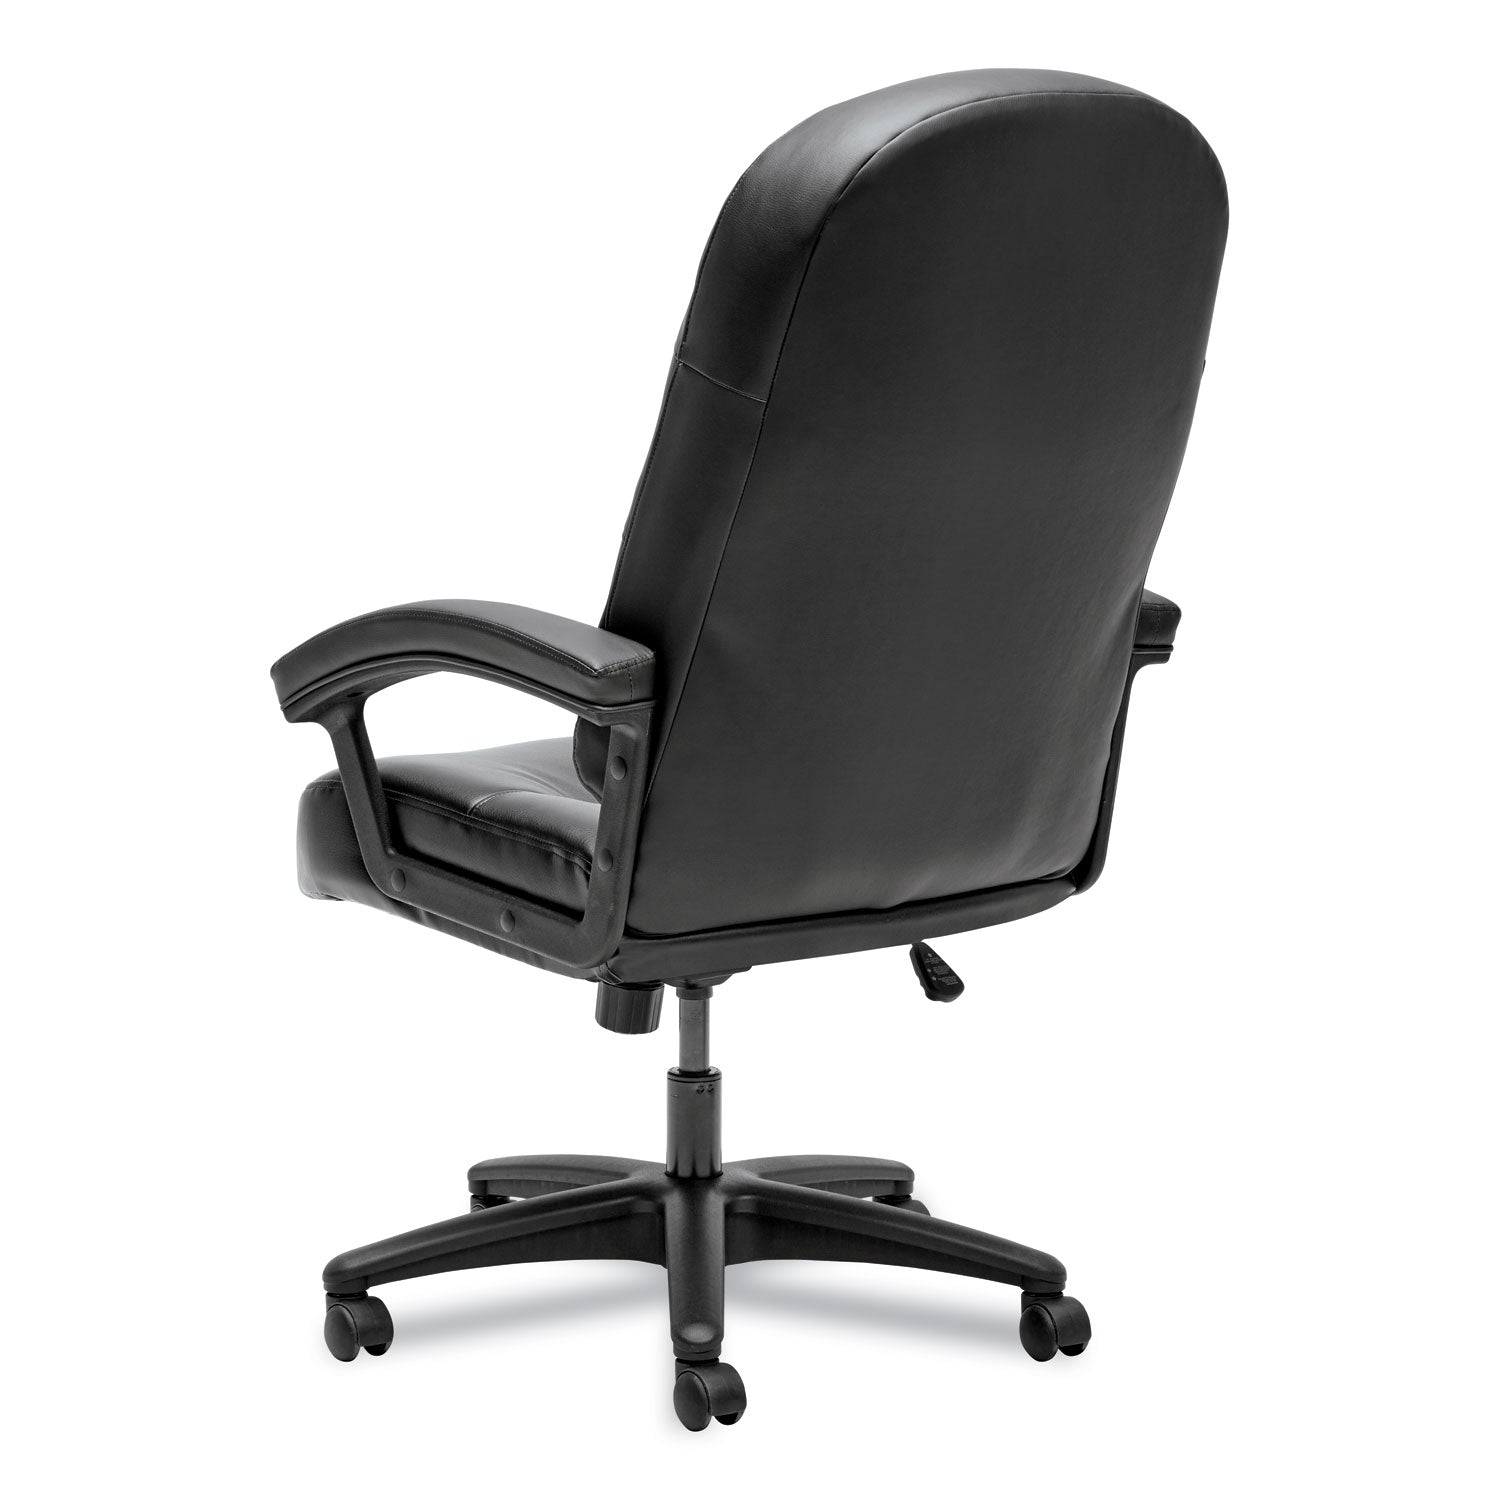 pillow-soft-2090-series-executive-high-back-swivel-tilt-chair-supports-up-to-250-lb-16-to-21-seat-height-black_hon2095hpwst11t - 5